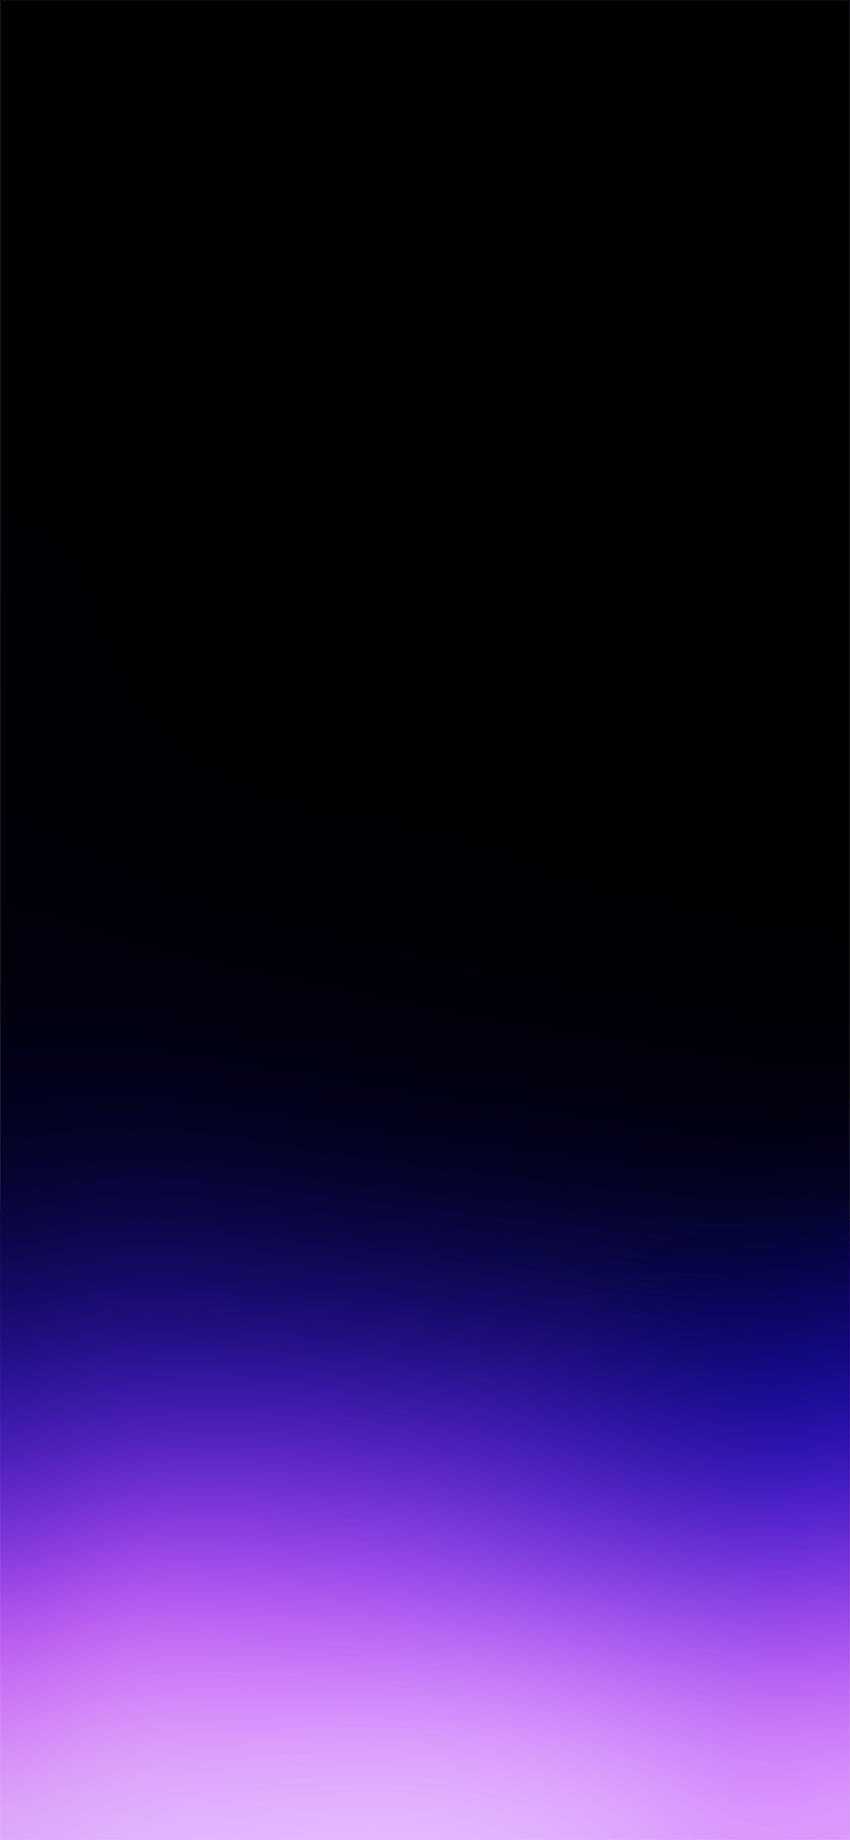 Colorful OLED - , Colorful OLED Background on Bat, Black Gradient iPhone HD phone wallpaper